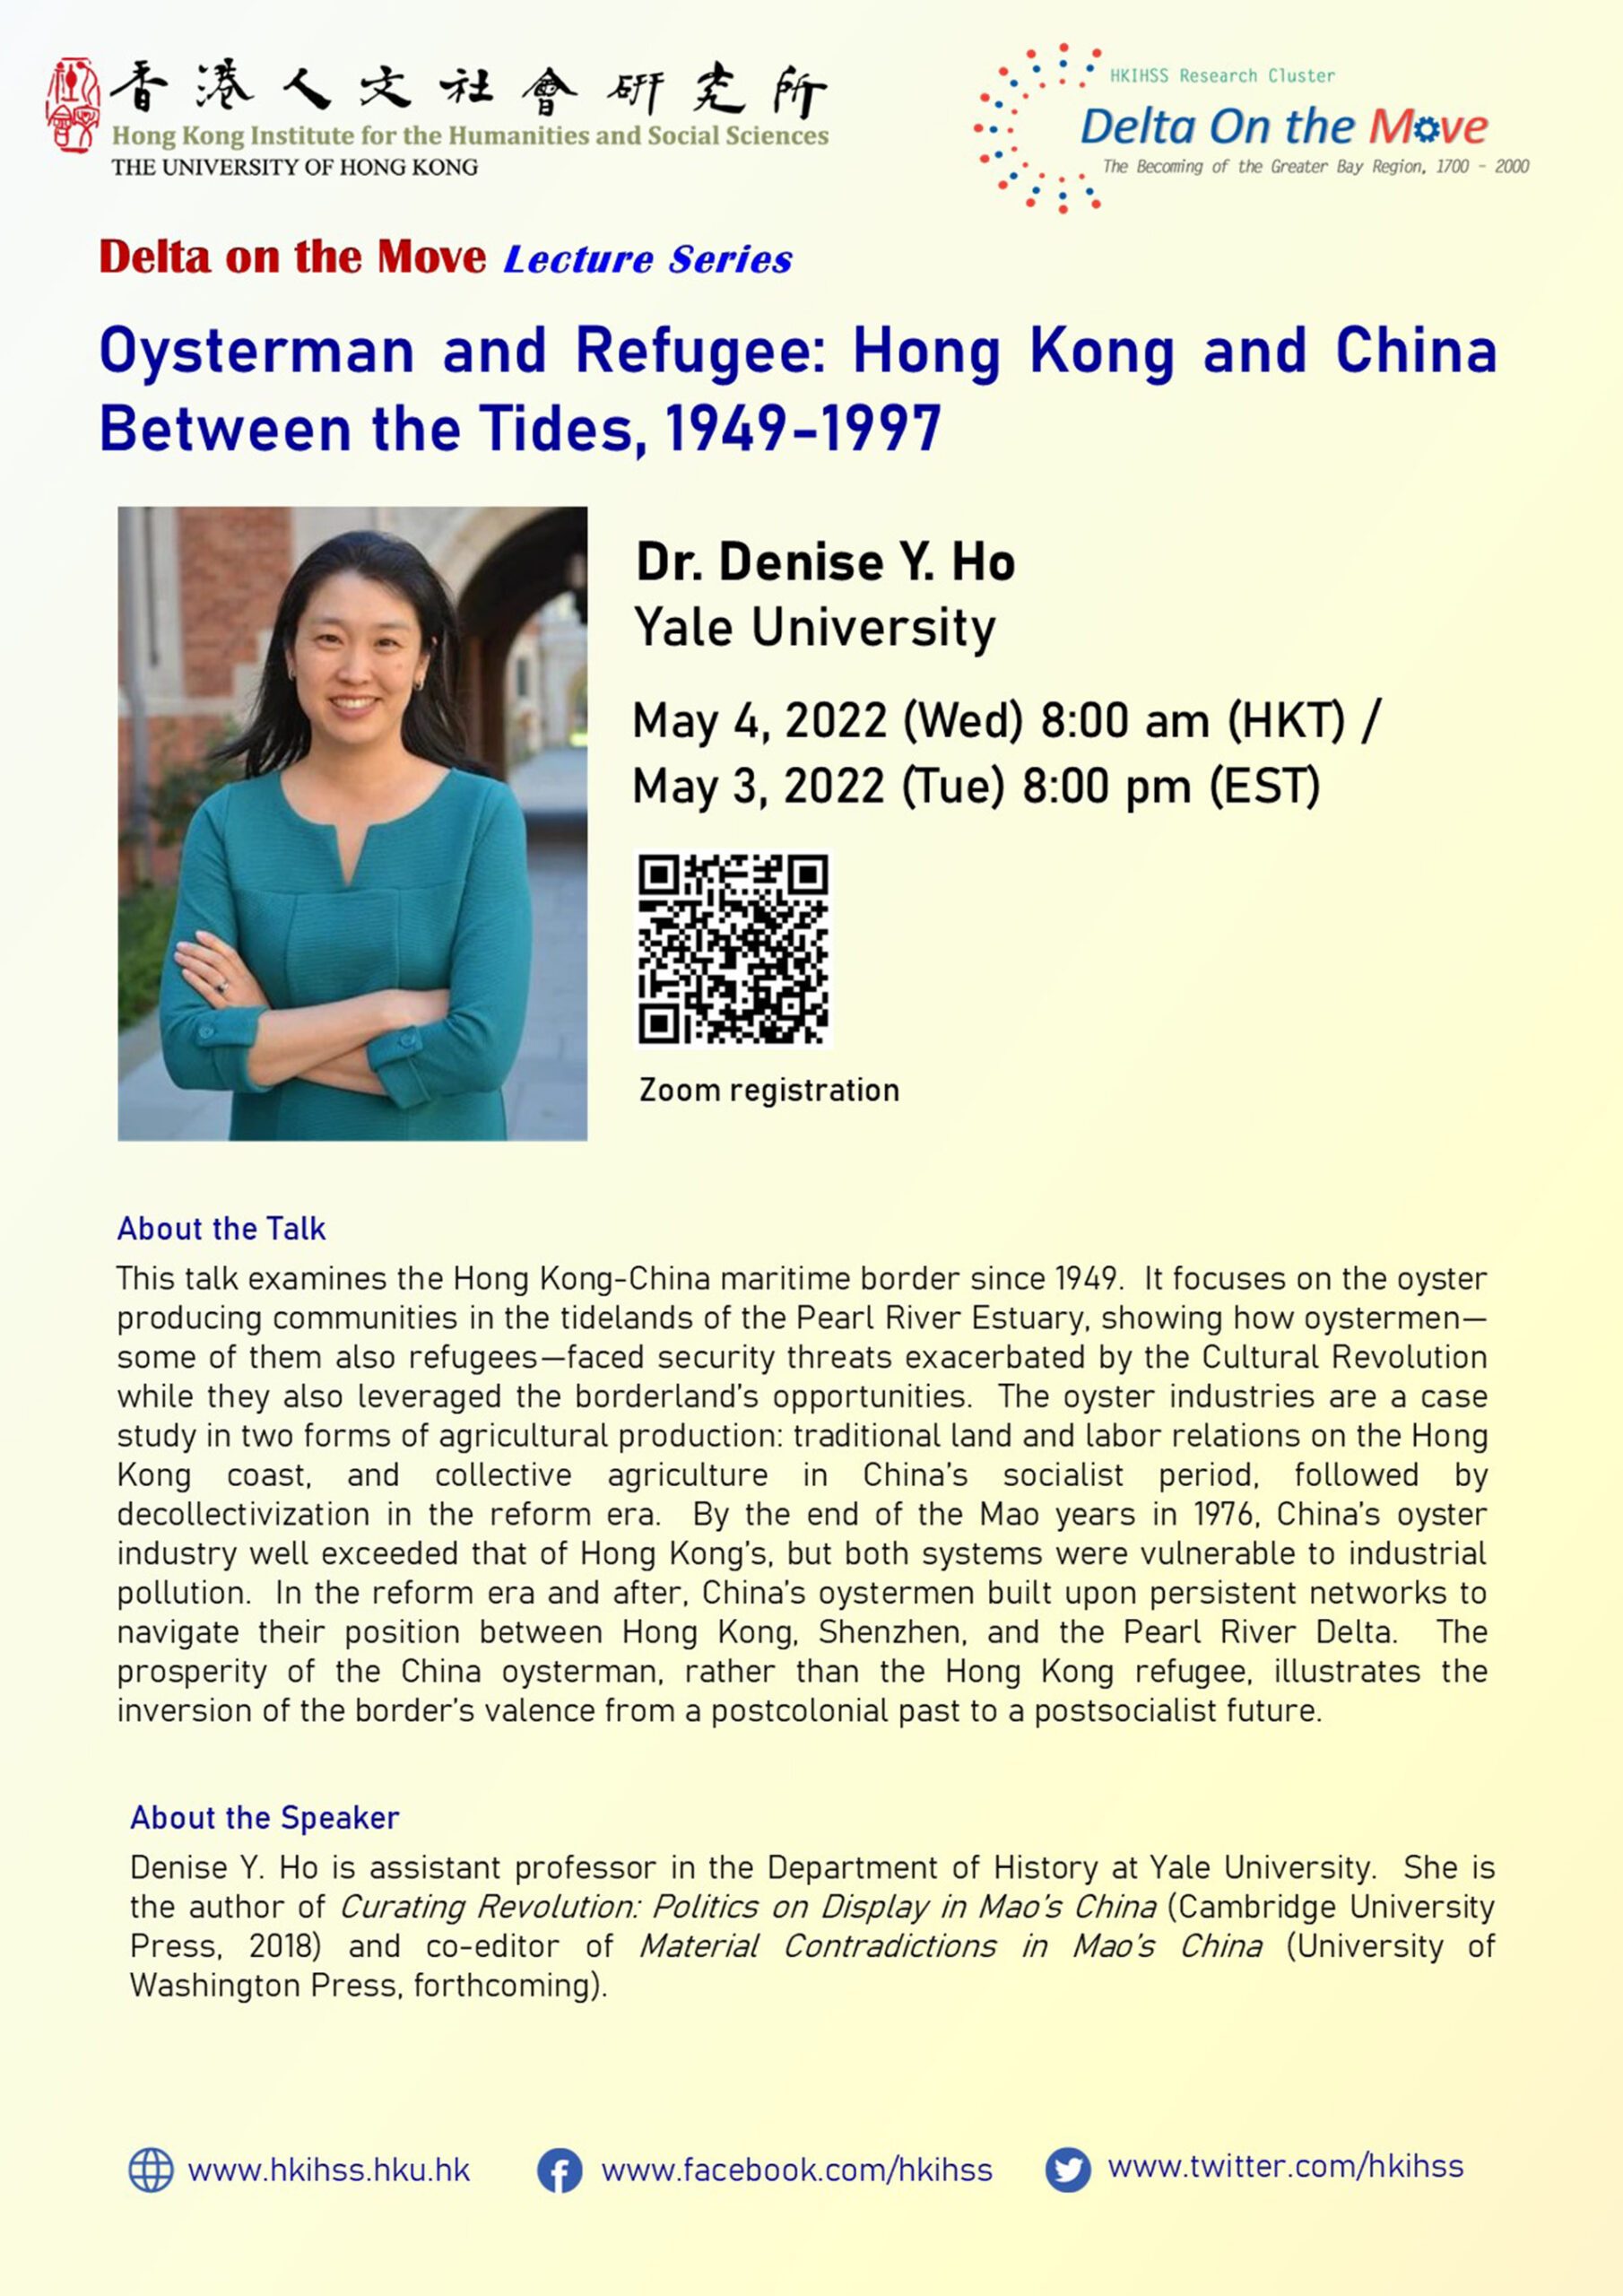 Delta on the Move Lecture Series “Oysterman and Refugee: Hong Kong and China Between the Tides, 1949 – 1997